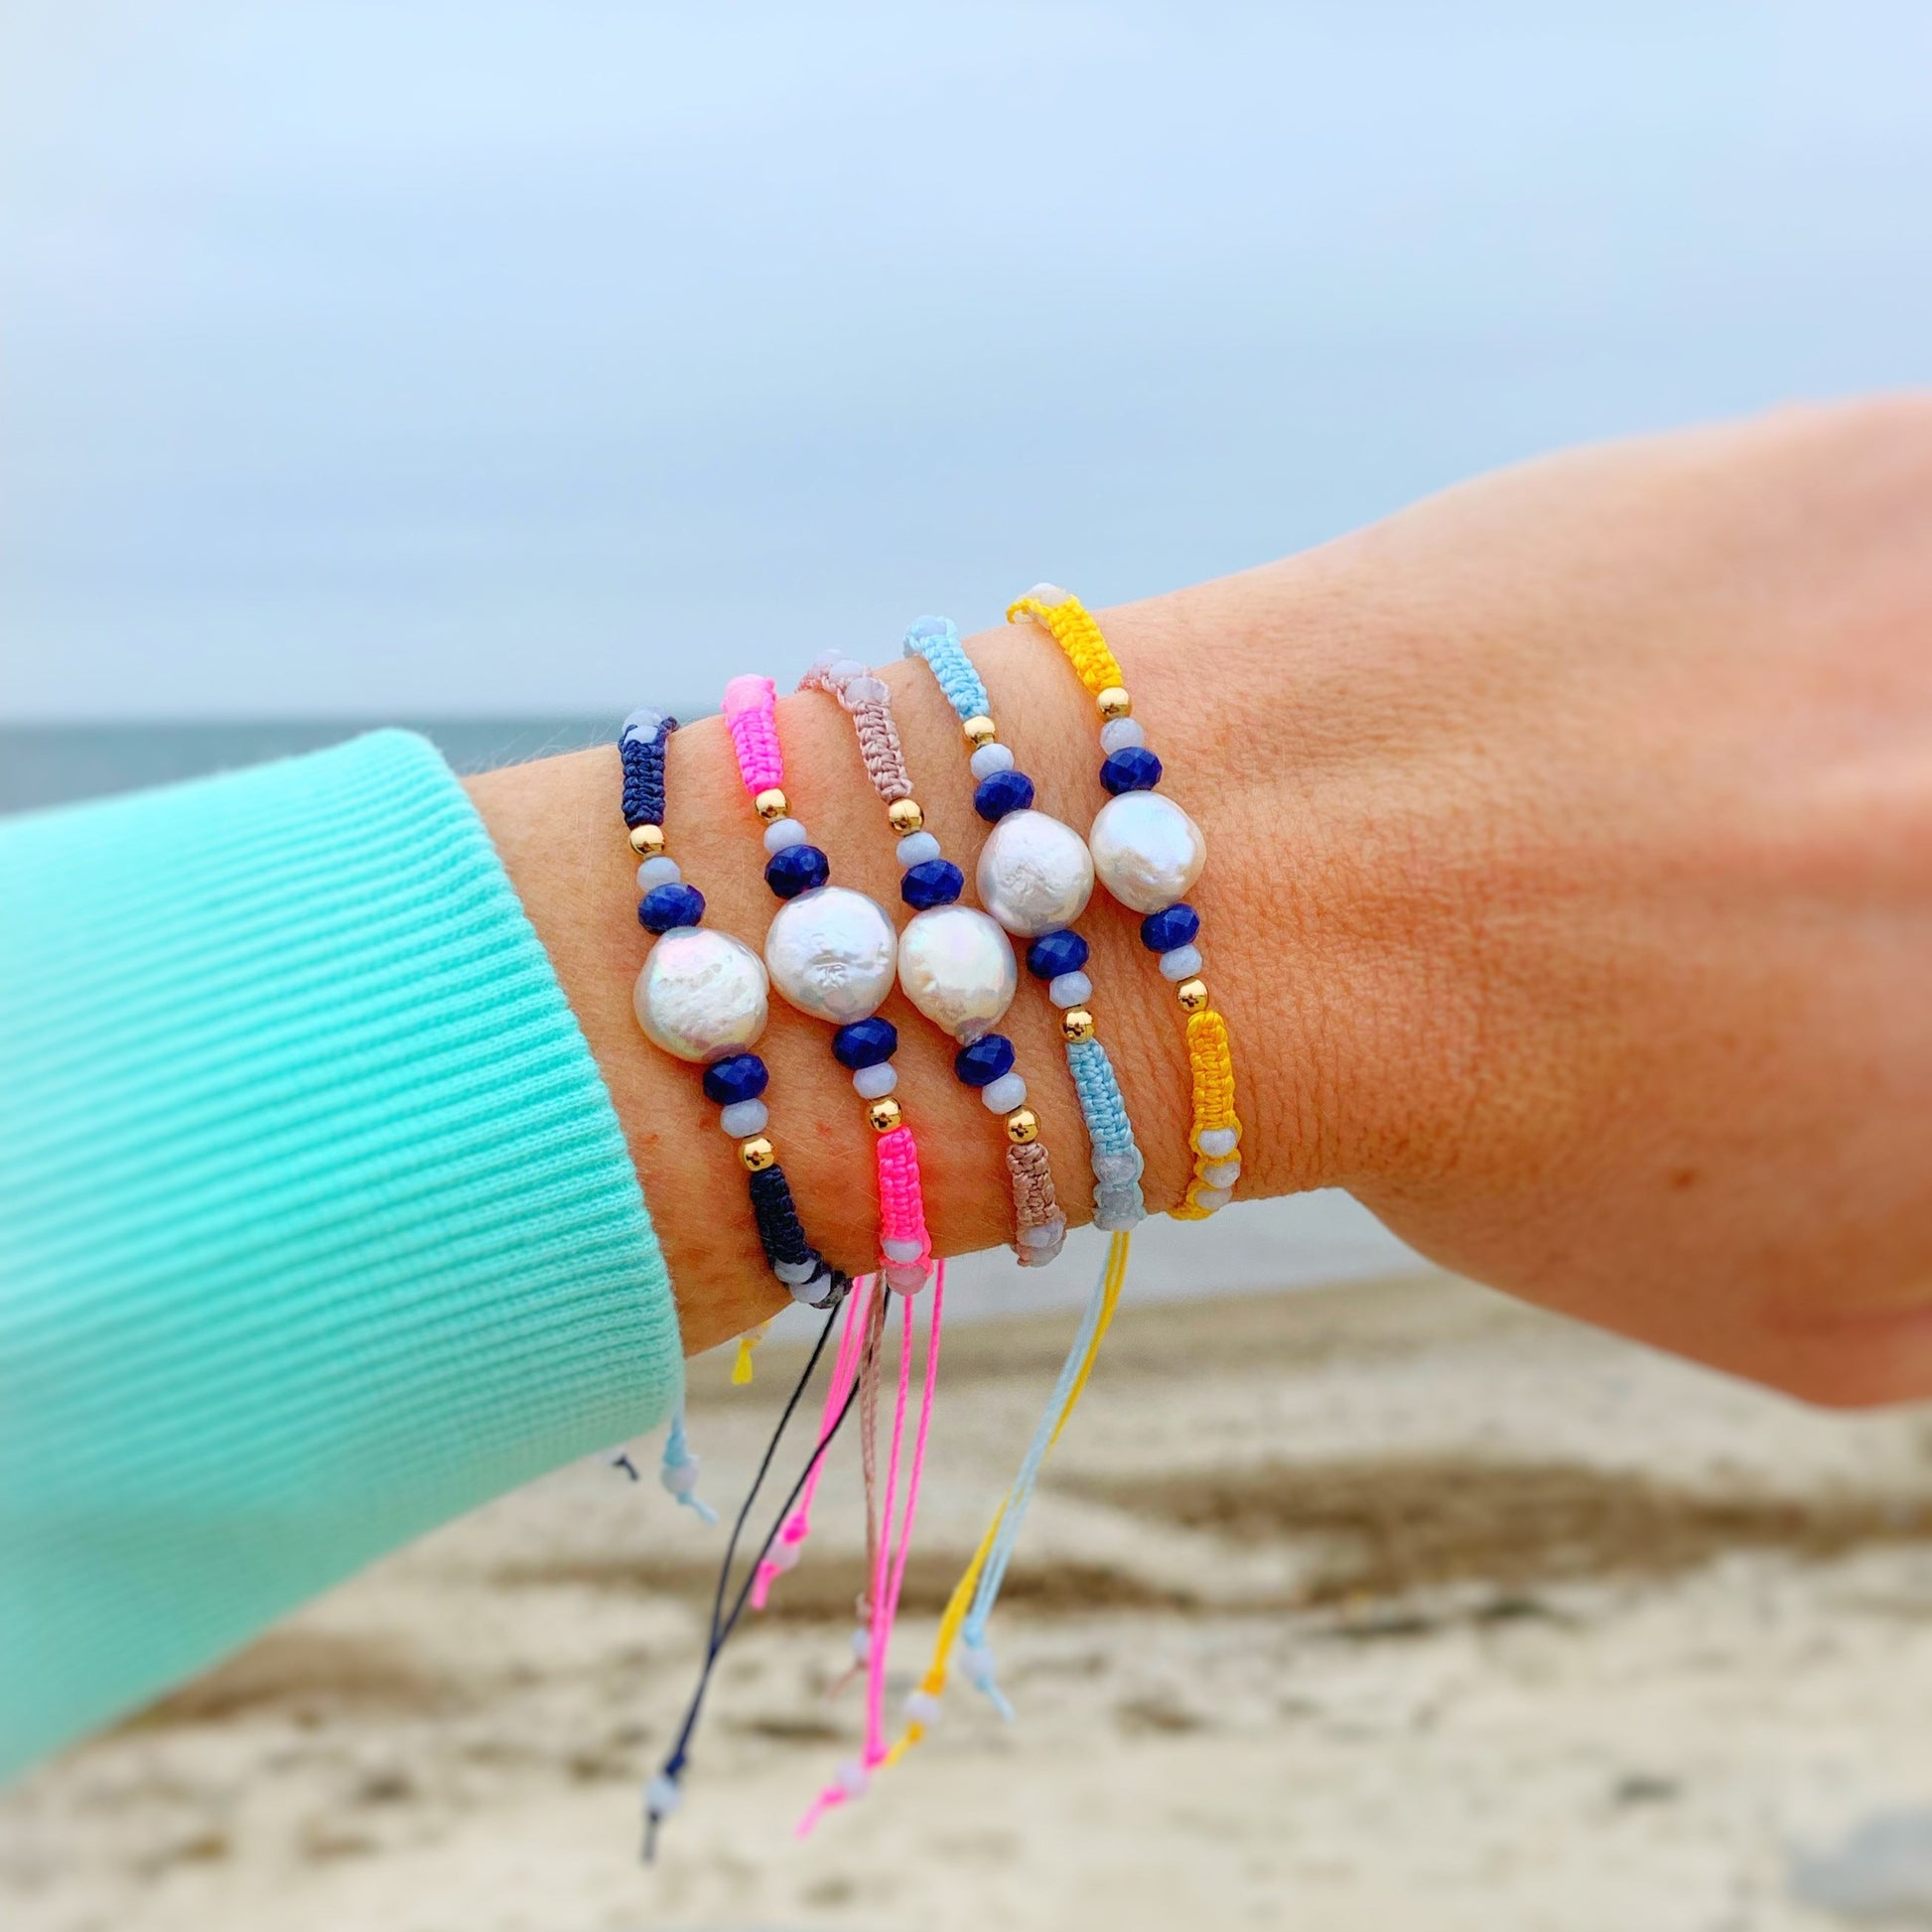 Mermaids and madeleines bristol macrame bracelets are adjustable woven friendship bracelets with a 14k gold filled slide clasp. pictured here are all 5 available colors worn on a wrist in front of the ocean and beach in the background